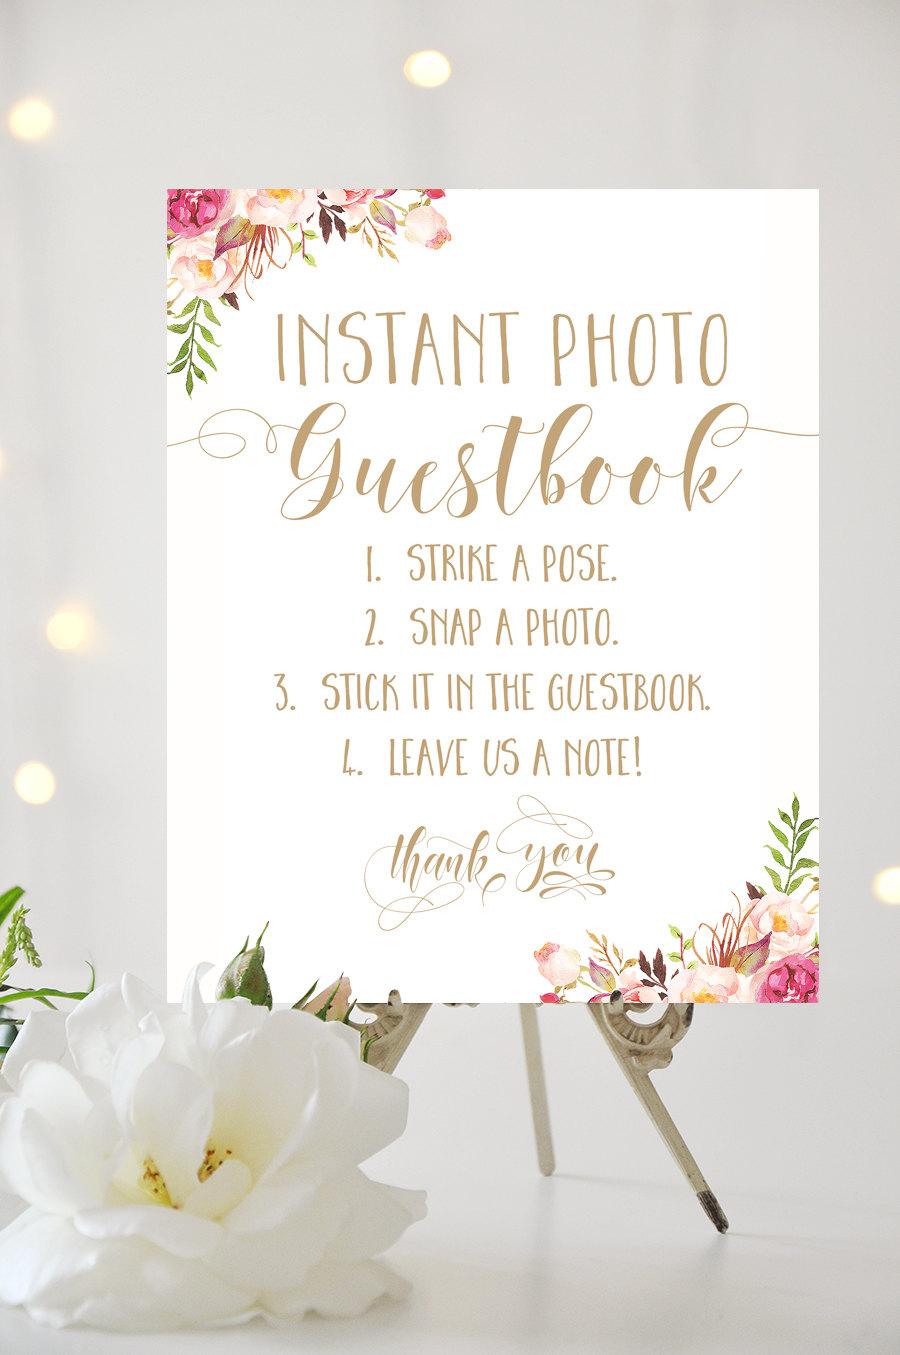 Mariage - Instant Photo Guestbook Sign - 8 x 10 - Printable sign in "Shine" antique gold  - Romantic Blooms - PDF and JPG files - Instant Download